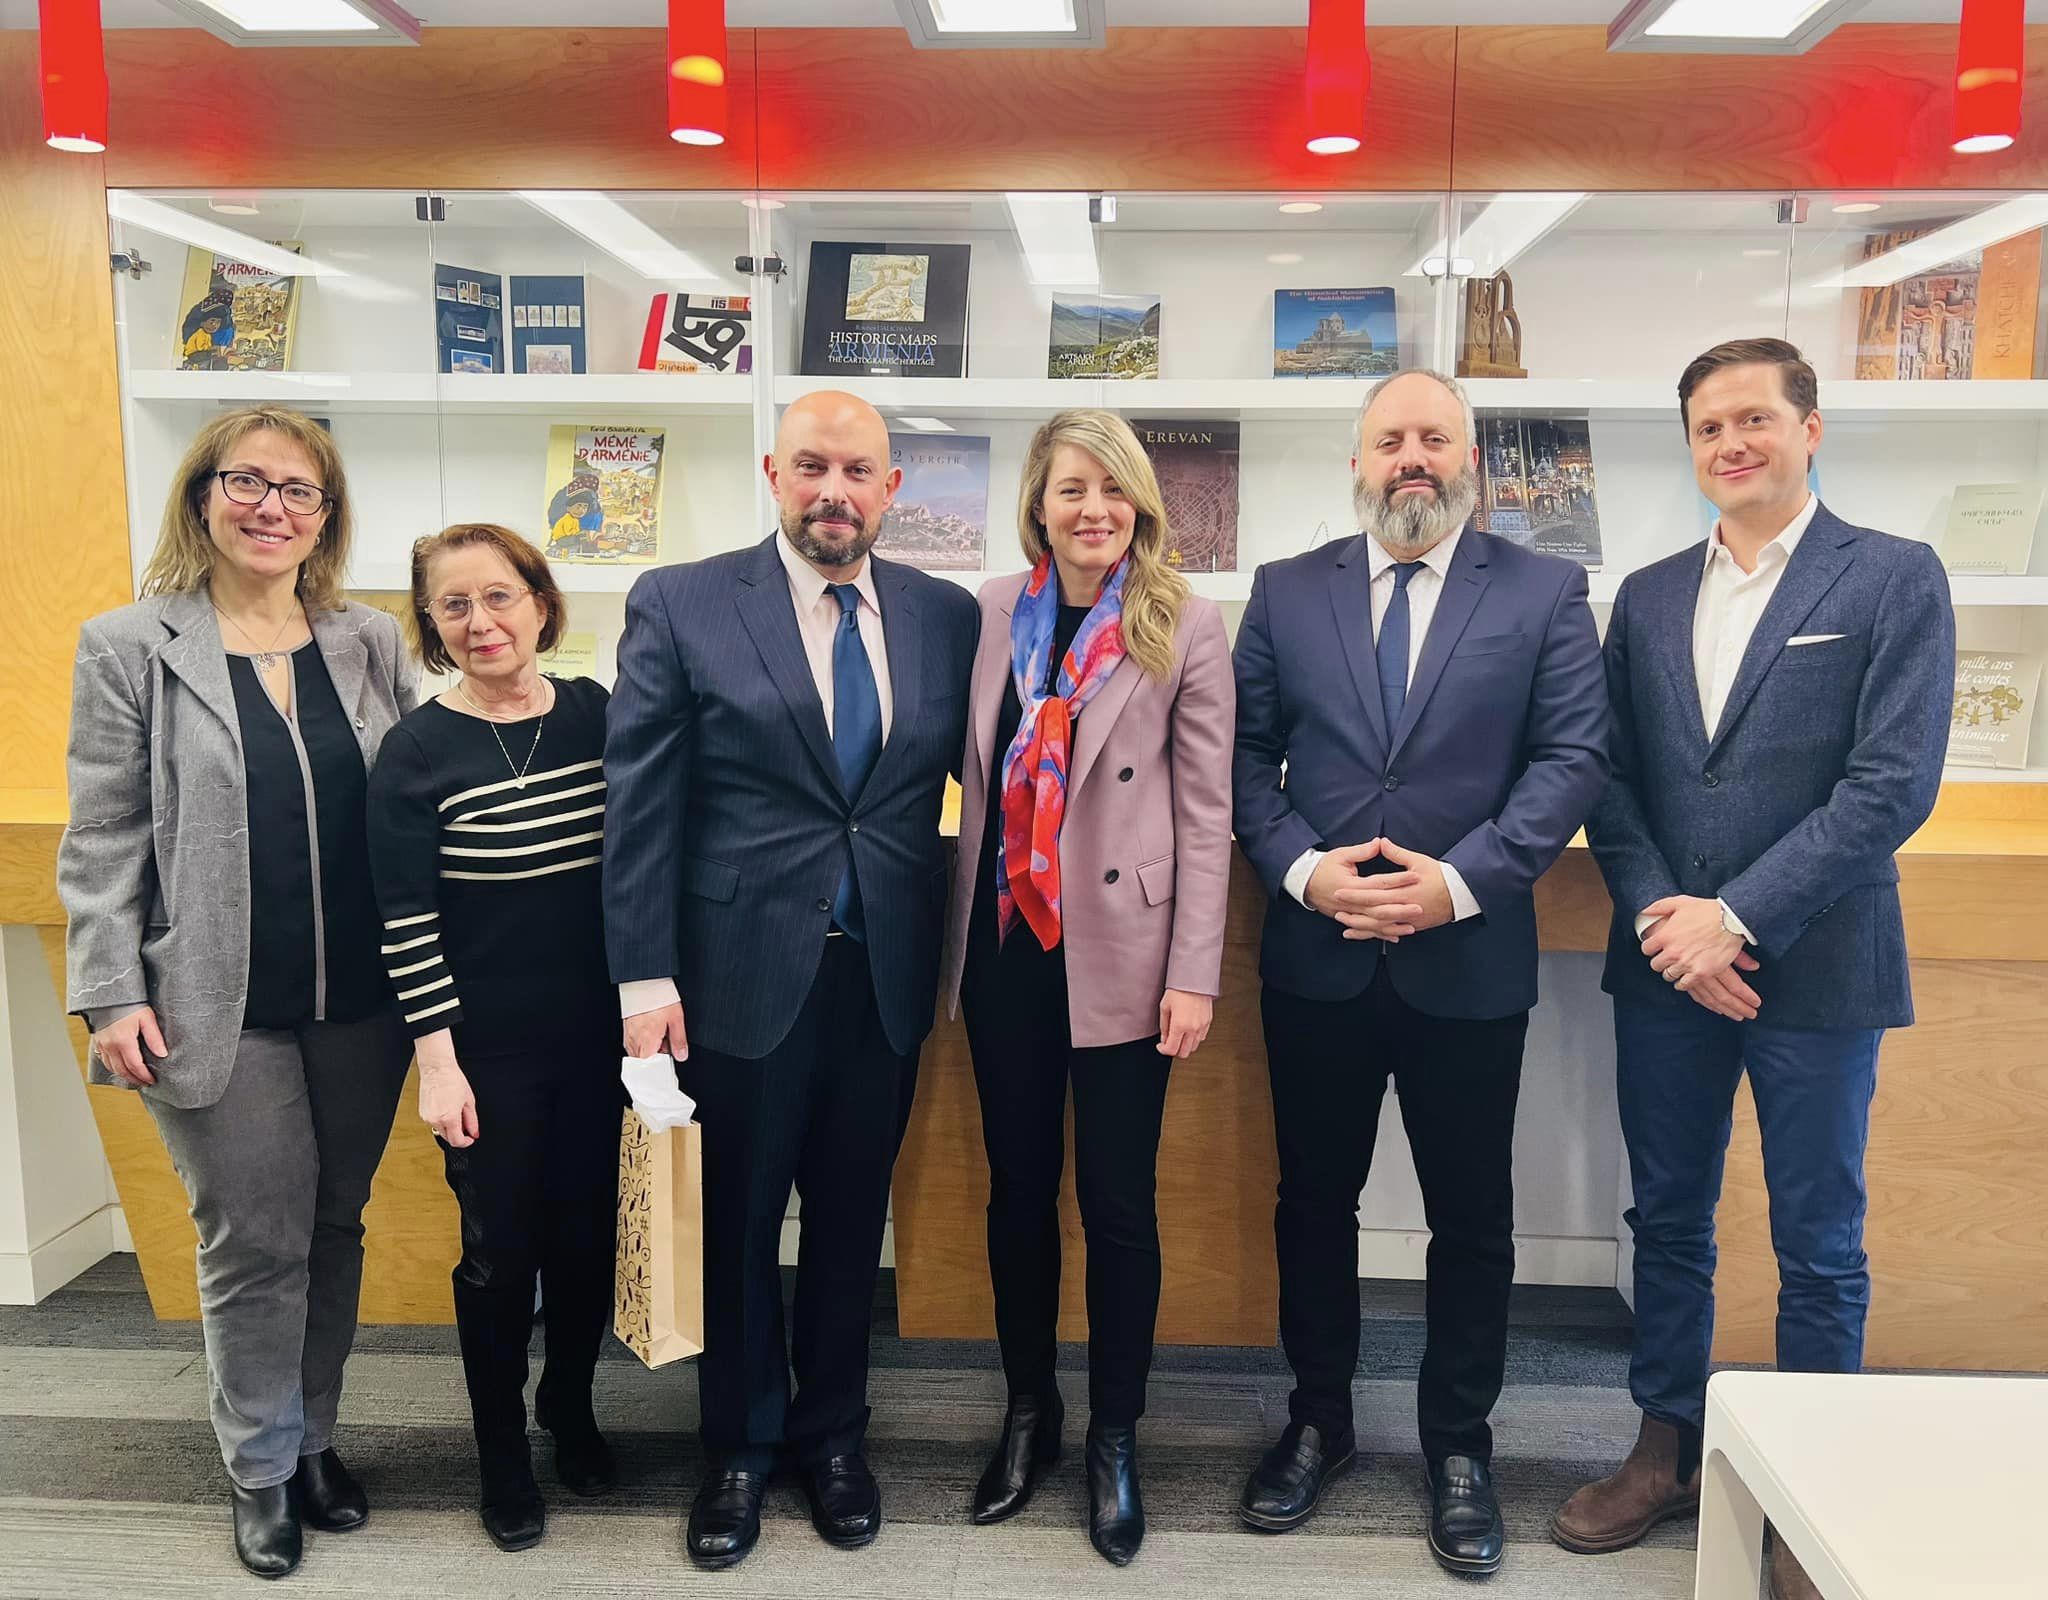 MINISTER JOLY’S VISIT AND MEETING AT AGBU – December 2022